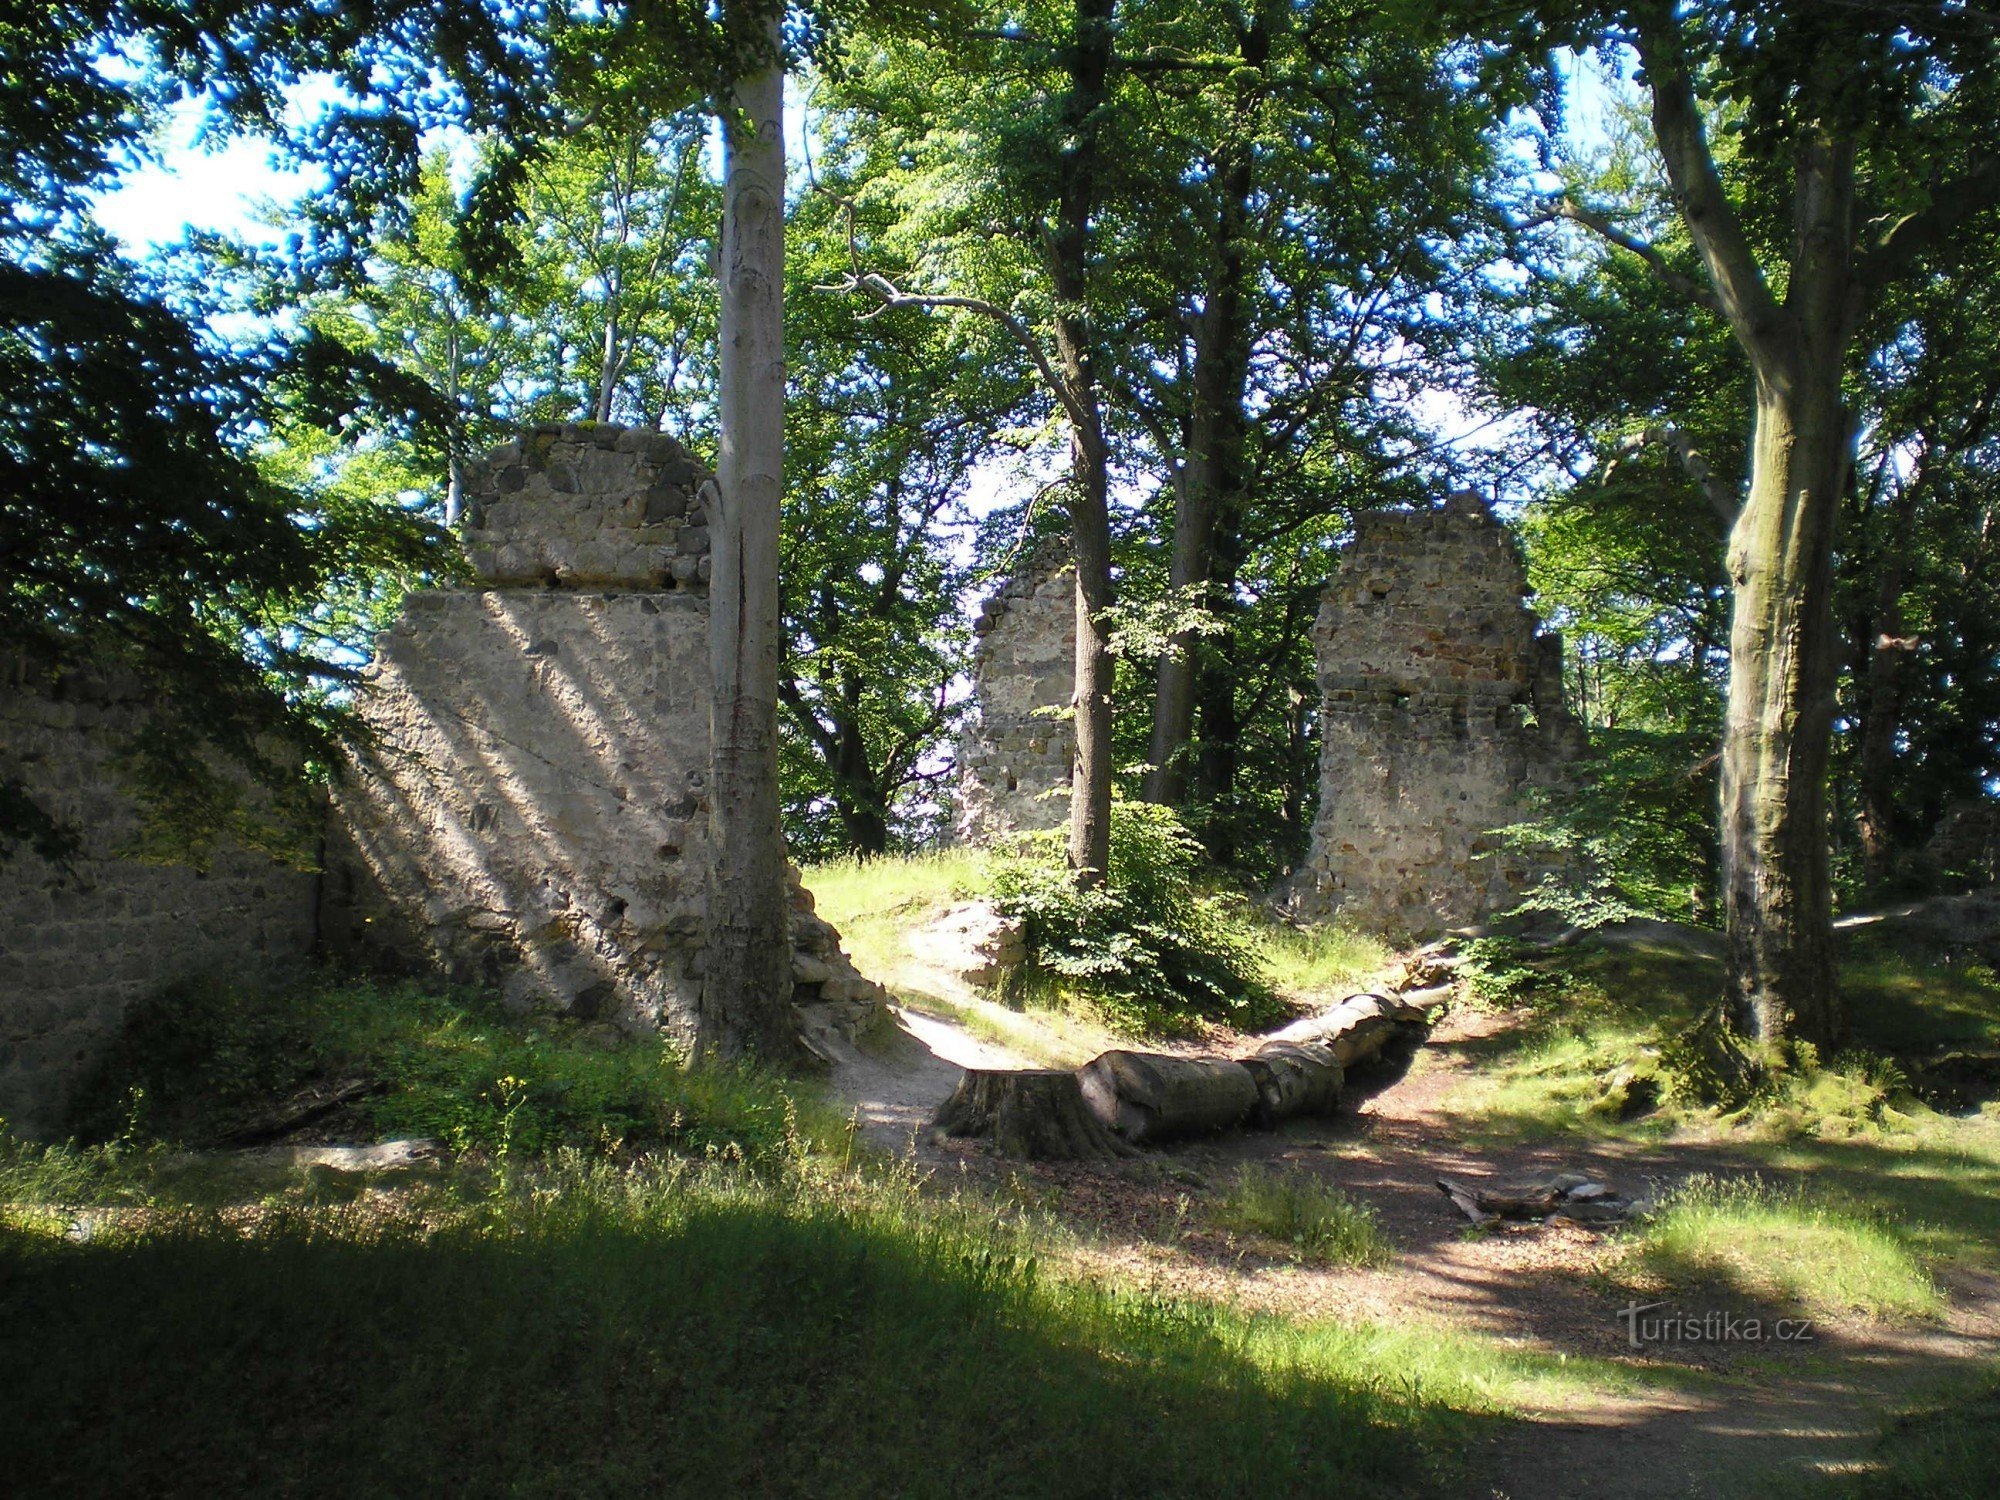 The ruins of Devin Castle